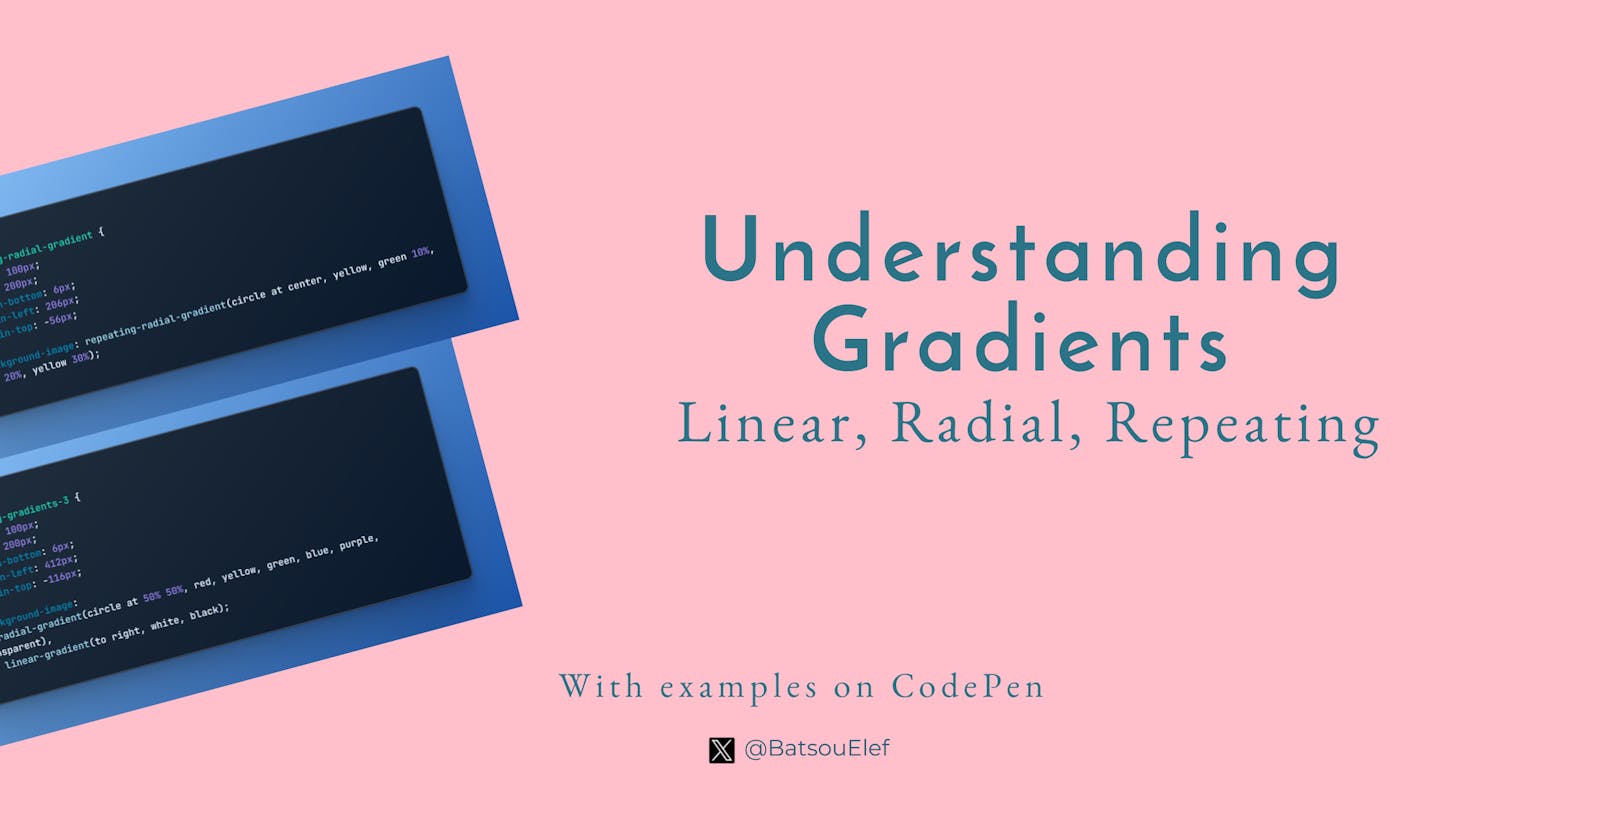 Understanding CSS3 Gradients: Linear, Radial, and Repeating